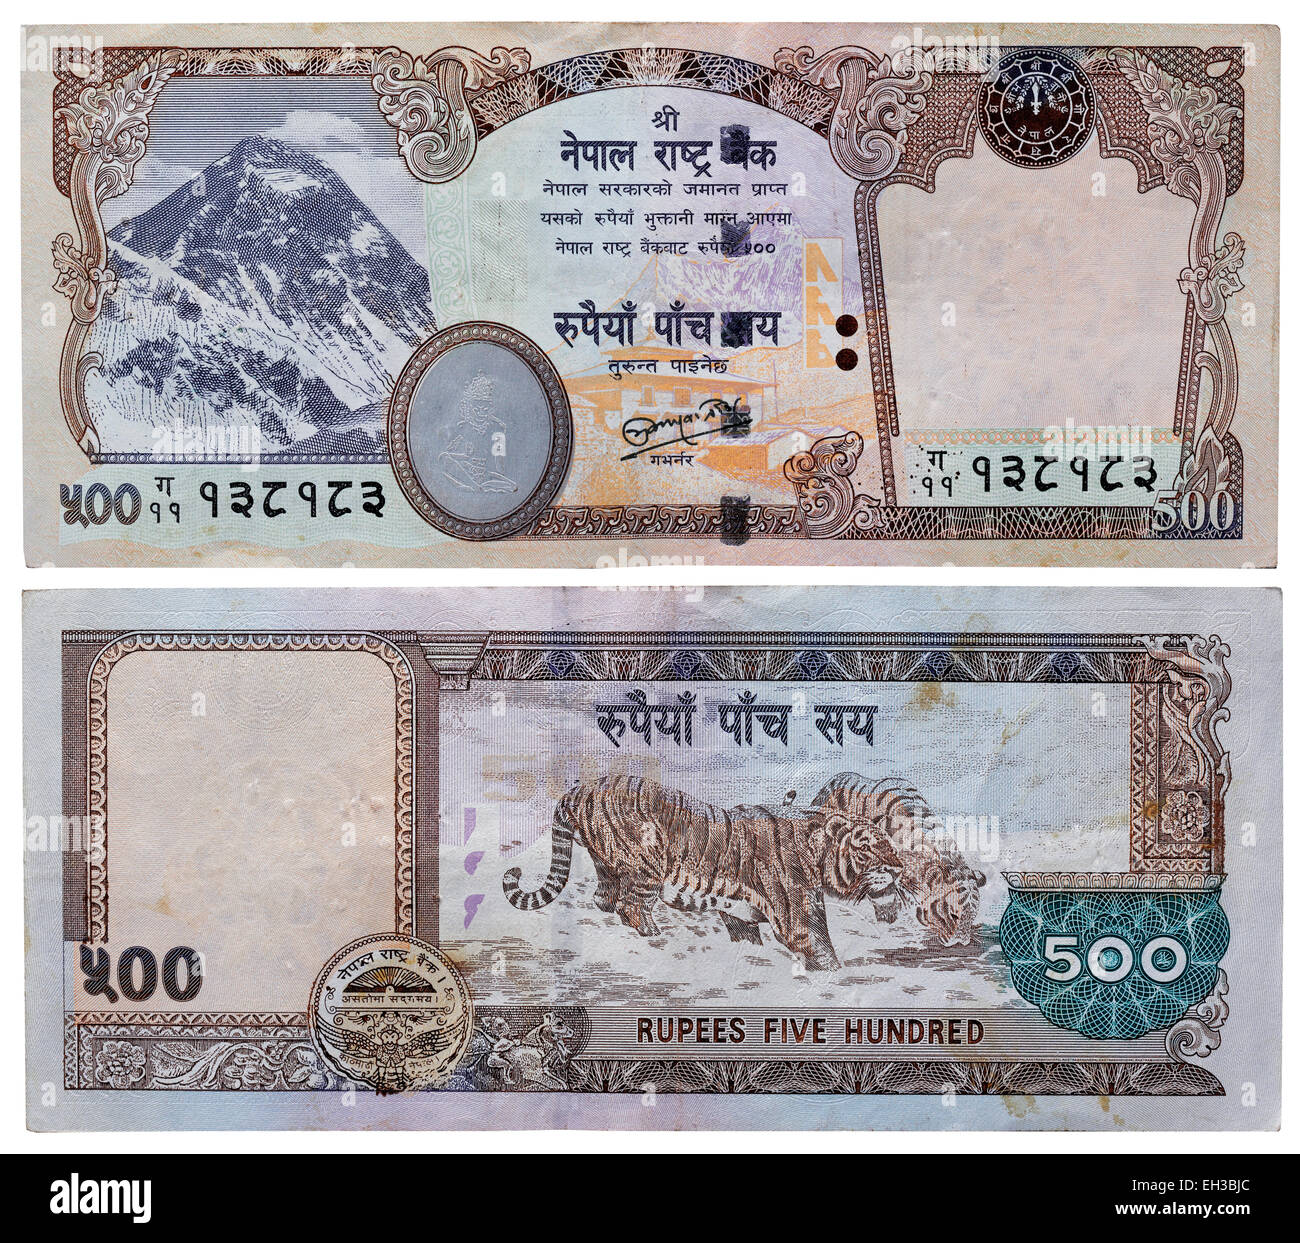 500 rupees banknote, Mount Everest and tigers, Nepal, 2008 Stock Photo